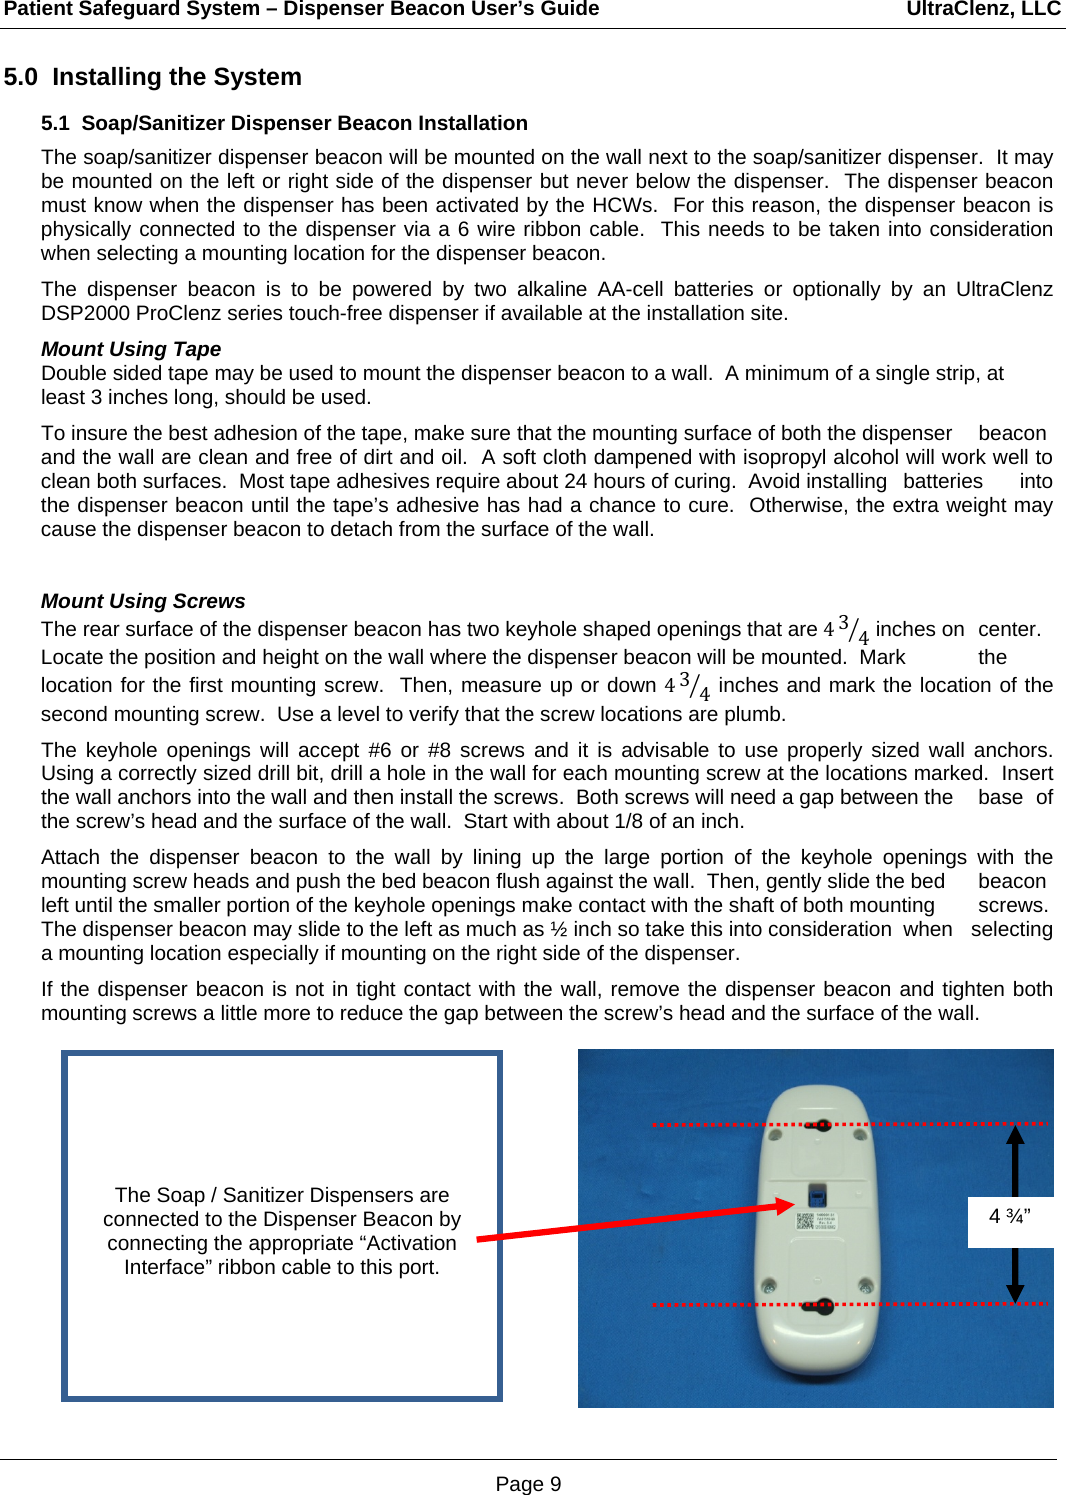 Patient Safeguard System – Dispenser Beacon User’s Guide                                                     UltraClenz, LLC Page 9 5.0  Installing the System 5.1  Soap/Sanitizer Dispenser Beacon Installation The soap/sanitizer dispenser beacon will be mounted on the wall next to the soap/sanitizer dispenser.  It may be mounted on the left or right side of the dispenser but never below the dispenser.  The dispenser beacon must know when the dispenser has been activated by the HCWs.  For this reason, the dispenser beacon is physically connected to the dispenser via a 6 wire ribbon cable.  This needs to be taken into consideration when selecting a mounting location for the dispenser beacon.  The dispenser beacon is to be powered by two alkaline AA-cell batteries or optionally by an UltraClenz DSP2000 ProClenz series touch-free dispenser if available at the installation site.    Mount Using Tape Double sided tape may be used to mount the dispenser beacon to a wall.  A minimum of a single strip, at least 3 inches long, should be used.    To insure the best adhesion of the tape, make sure that the mounting surface of both the dispenser   beacon and the wall are clean and free of dirt and oil.  A soft cloth dampened with isopropyl alcohol will work well to clean both surfaces.  Most tape adhesives require about 24 hours of curing.  Avoid installing   batteries  into the dispenser beacon until the tape’s adhesive has had a chance to cure.  Otherwise, the extra weight may cause the dispenser beacon to detach from the surface of the wall.   Mount Using Screws The rear surface of the dispenser beacon has two keyhole shaped openings that are 434 inches on  center.  Locate the position and height on the wall where the dispenser beacon will be mounted.  Mark   the location for the first mounting screw.  Then, measure up or down 434 inches and mark the location of the second mounting screw.  Use a level to verify that the screw locations are plumb.     The keyhole openings will accept #6 or #8 screws and it is advisable to use properly sized wall anchors.  Using a correctly sized drill bit, drill a hole in the wall for each mounting screw at the locations marked.  Insert the wall anchors into the wall and then install the screws.  Both screws will need a gap between the   base  of the screw’s head and the surface of the wall.  Start with about 1/8 of an inch.  Attach the dispenser beacon to the wall by lining up the large portion of the keyhole openings with the mounting screw heads and push the bed beacon flush against the wall.  Then, gently slide the bed   beacon left until the smaller portion of the keyhole openings make contact with the shaft of both mounting   screws.  The dispenser beacon may slide to the left as much as ½ inch so take this into consideration  when  selecting a mounting location especially if mounting on the right side of the dispenser.  If the dispenser beacon is not in tight contact with the wall, remove the dispenser beacon and tighten both mounting screws a little more to reduce the gap between the screw’s head and the surface of the wall.      4 ¾”      The Soap / Sanitizer Dispensers are connected to the Dispenser Beacon by connecting the appropriate “Activation Interface” ribbon cable to this port. 